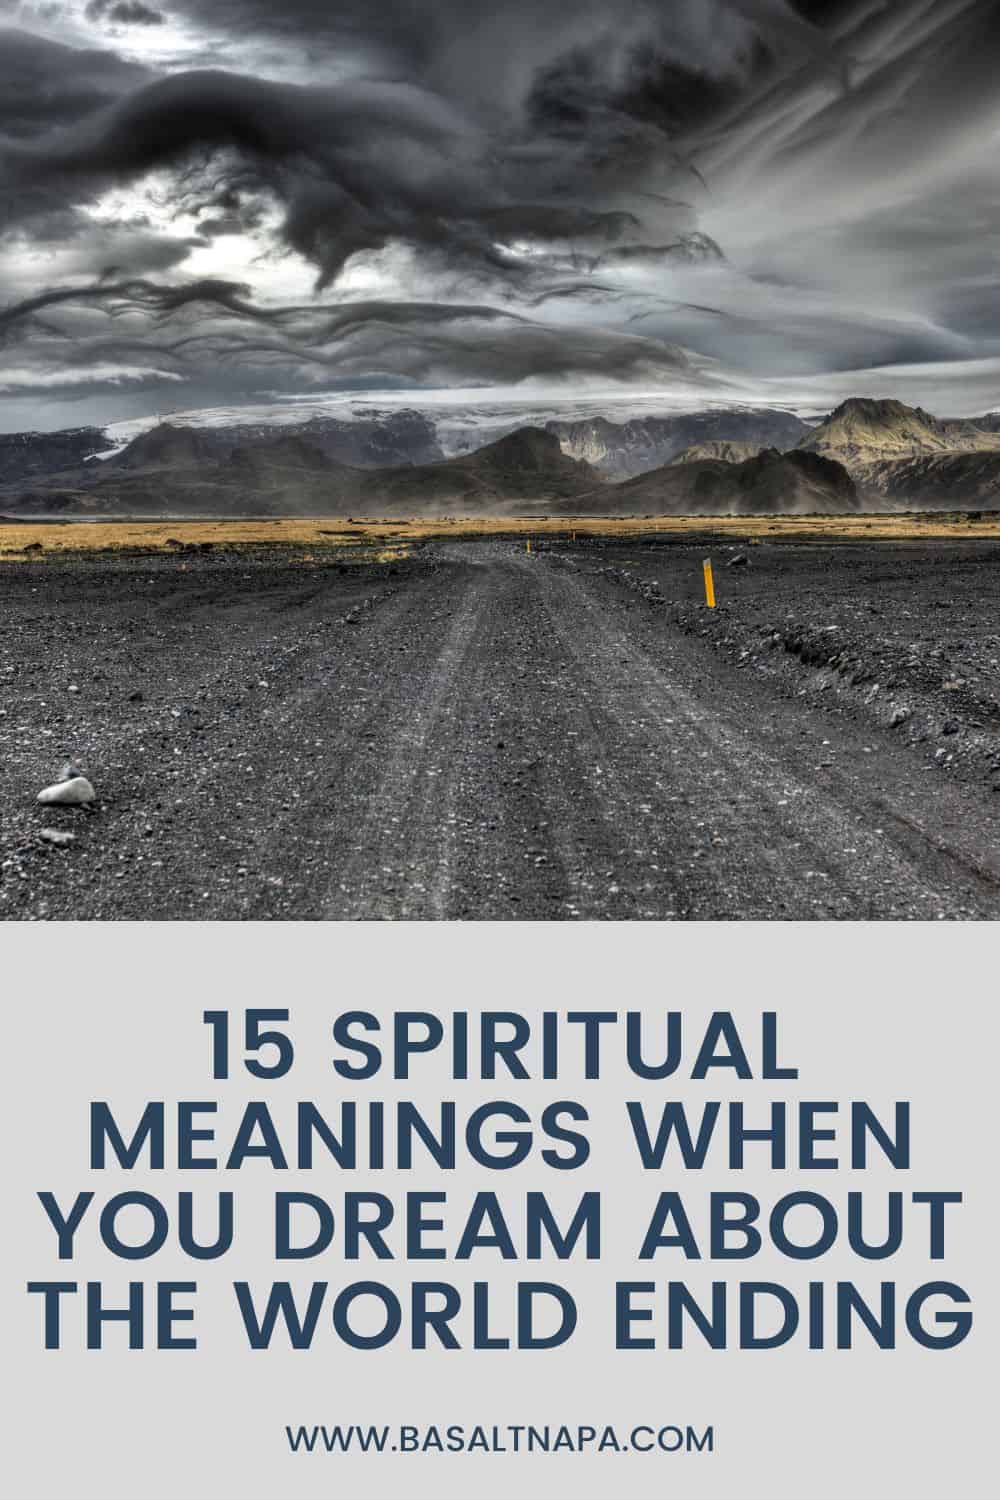 15 Spiritual Meanings When You Dream About the World Ending